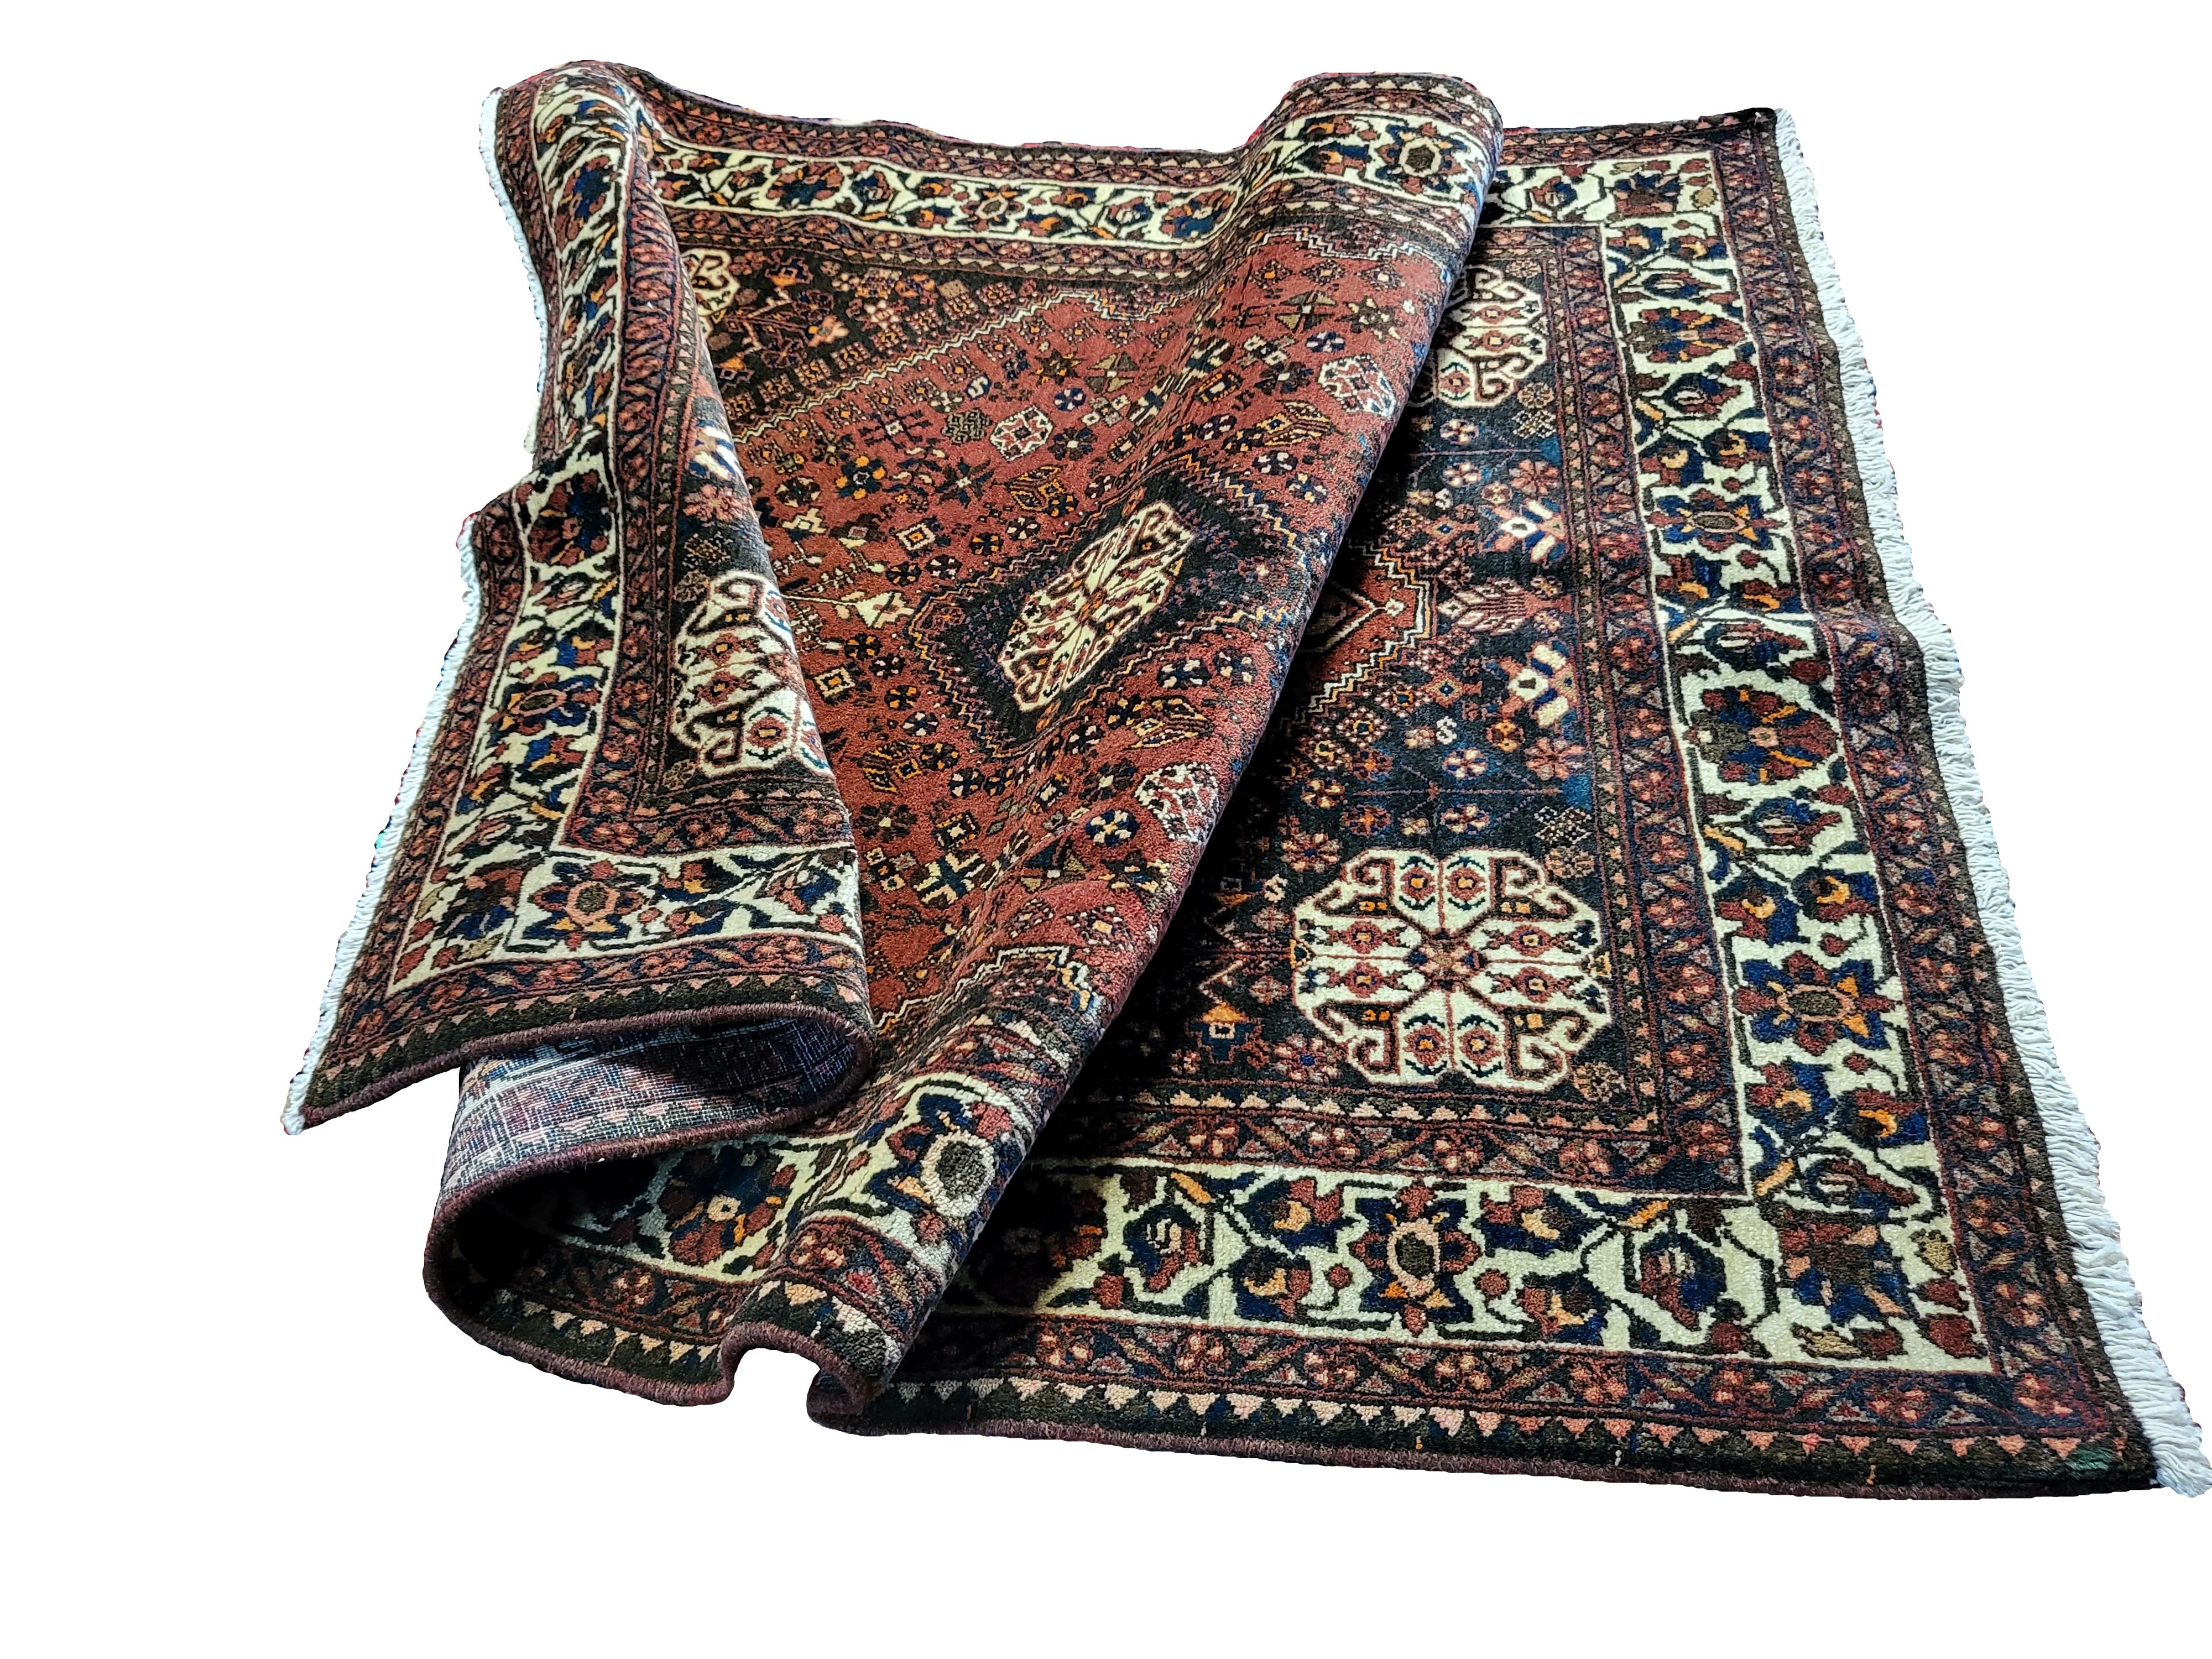 Immaculate 1930's Persian Abadeh, Tribal Style Rug

3' 6